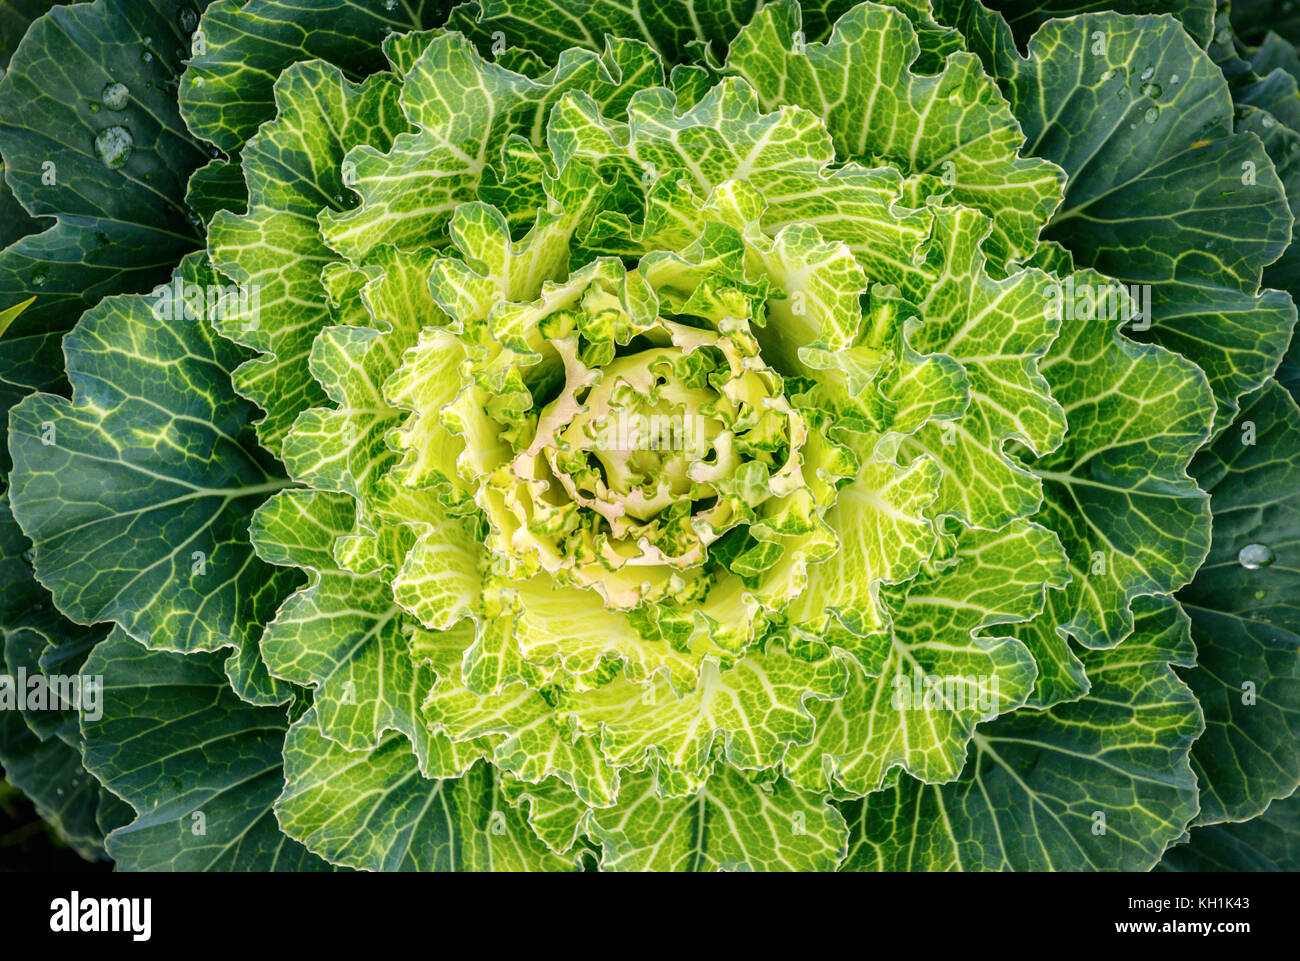 Close-up of a fresh cabbage with a yellow heart. Brassica oleracea acephala is a decorative kale species. Stock Photo